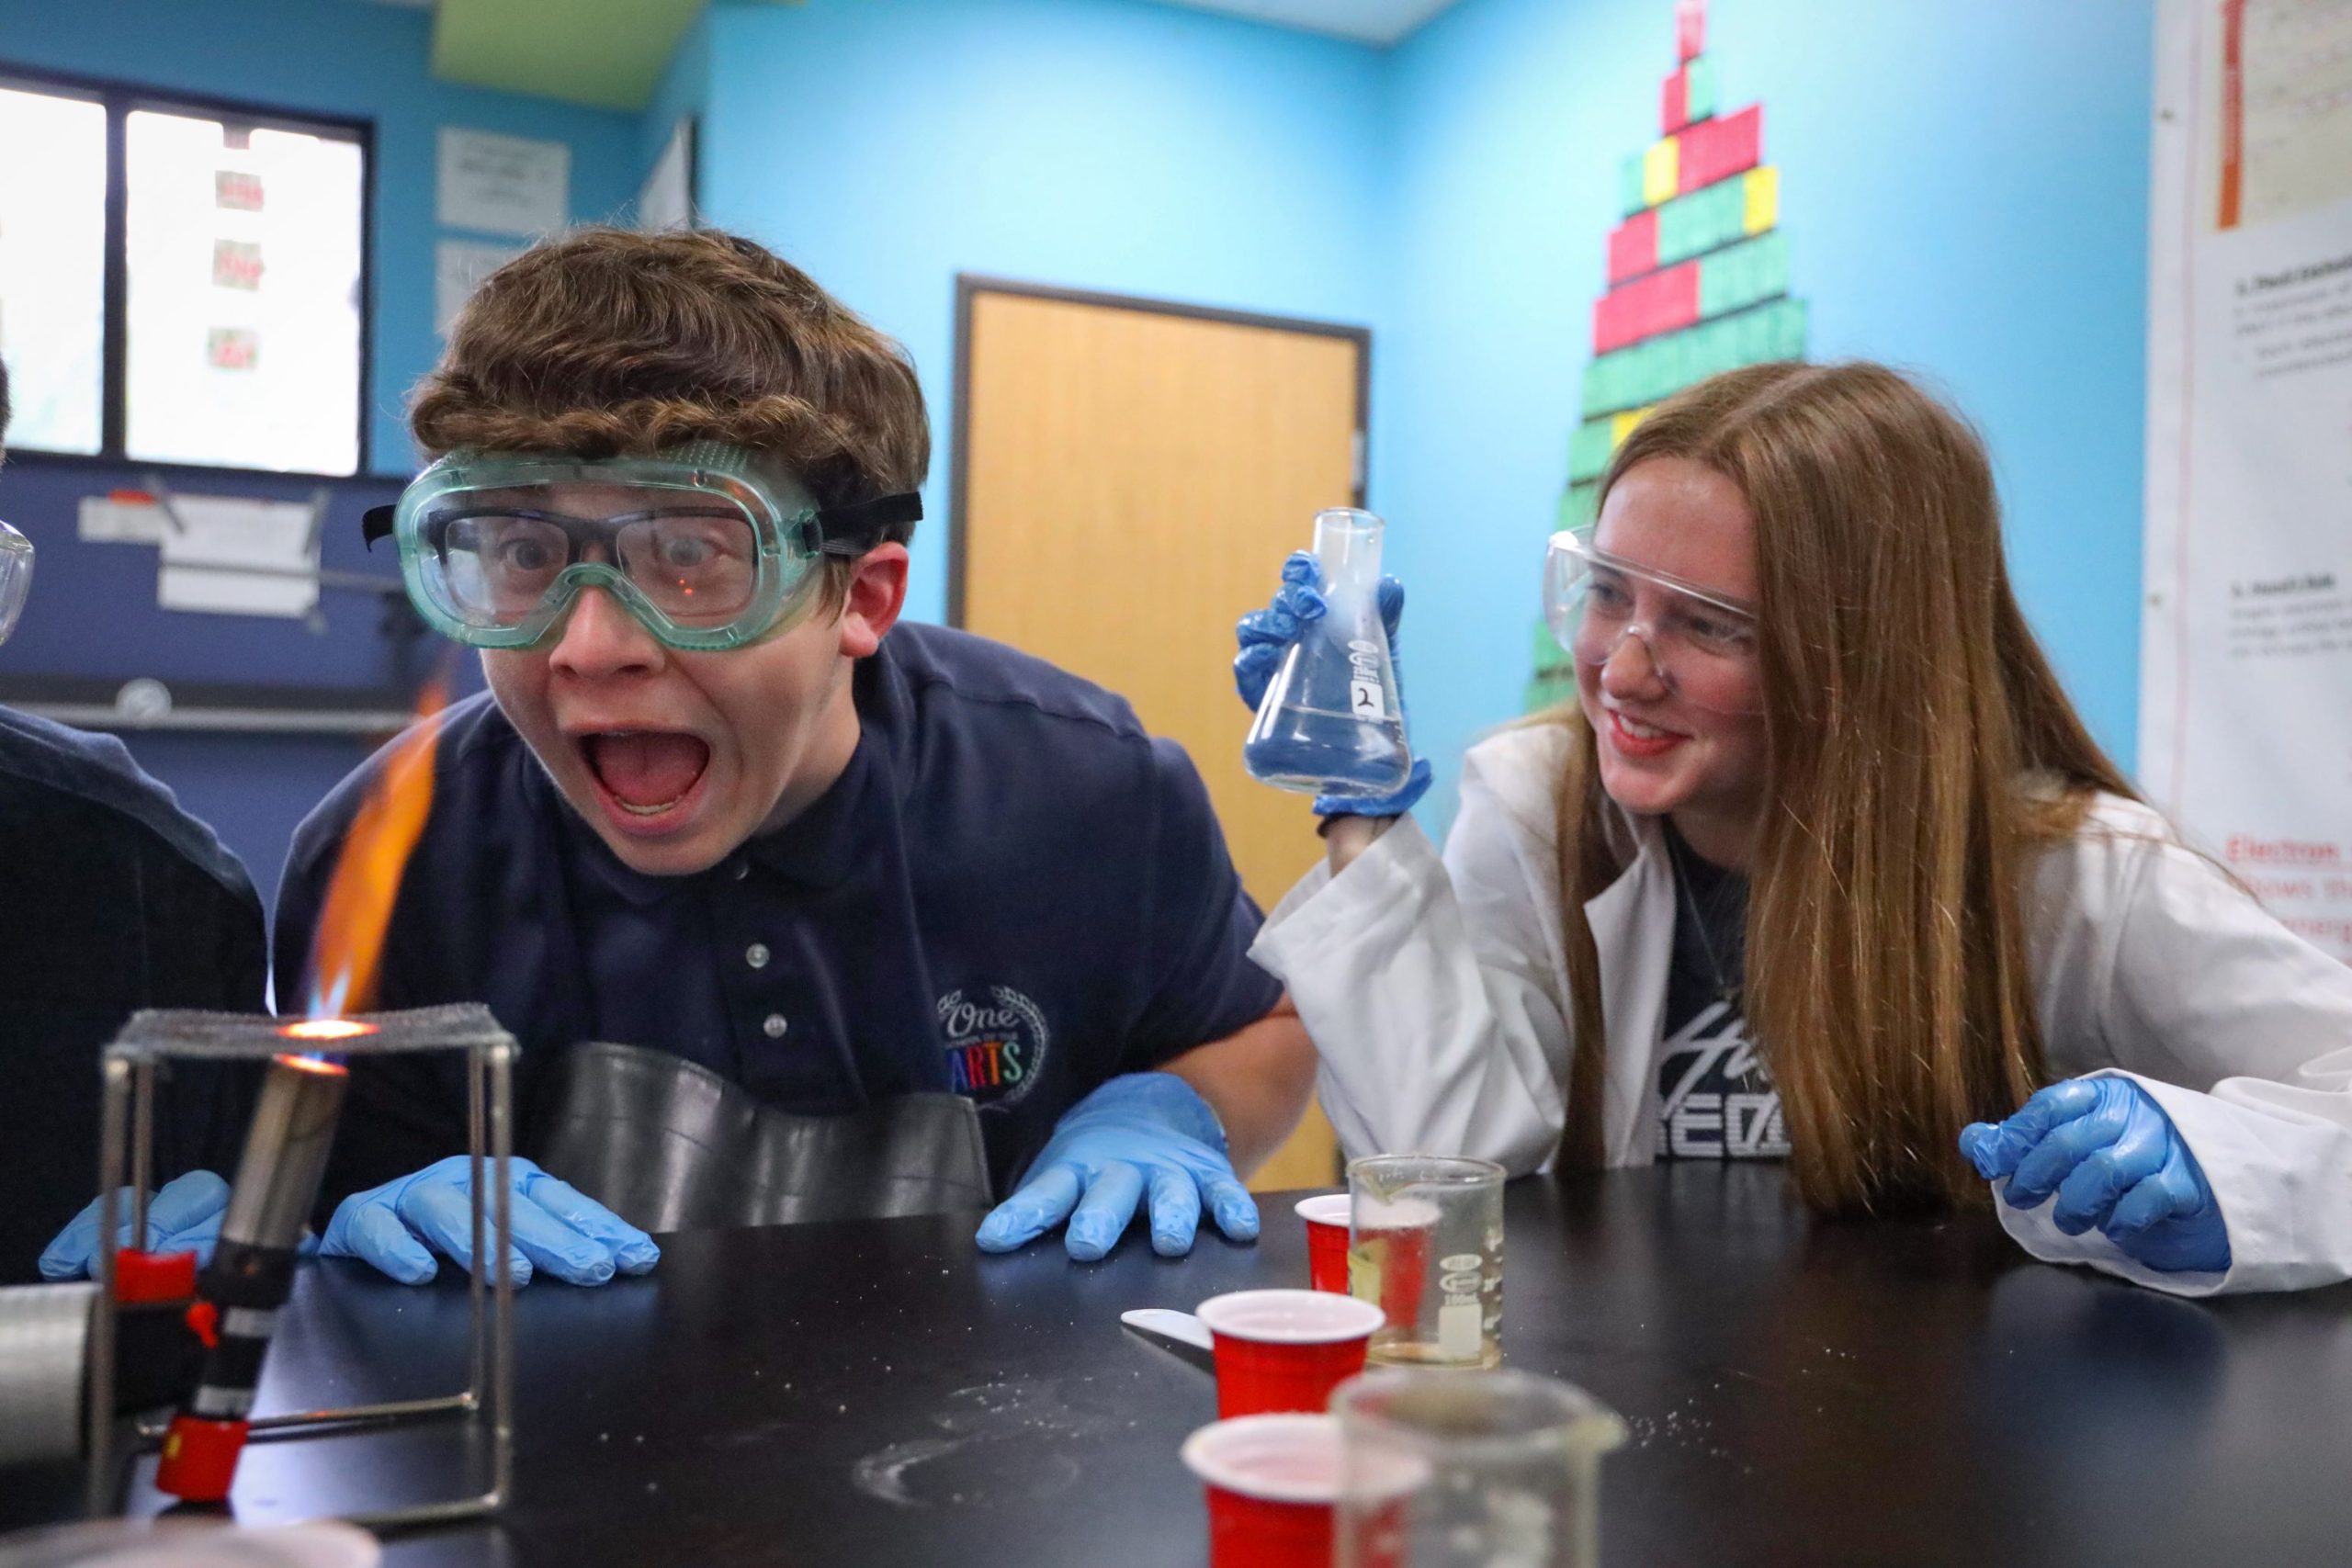 a photo of two students in a science lab. One has a shocked expression looking at the science experiment and the other student is grinning at the other student's reaction.